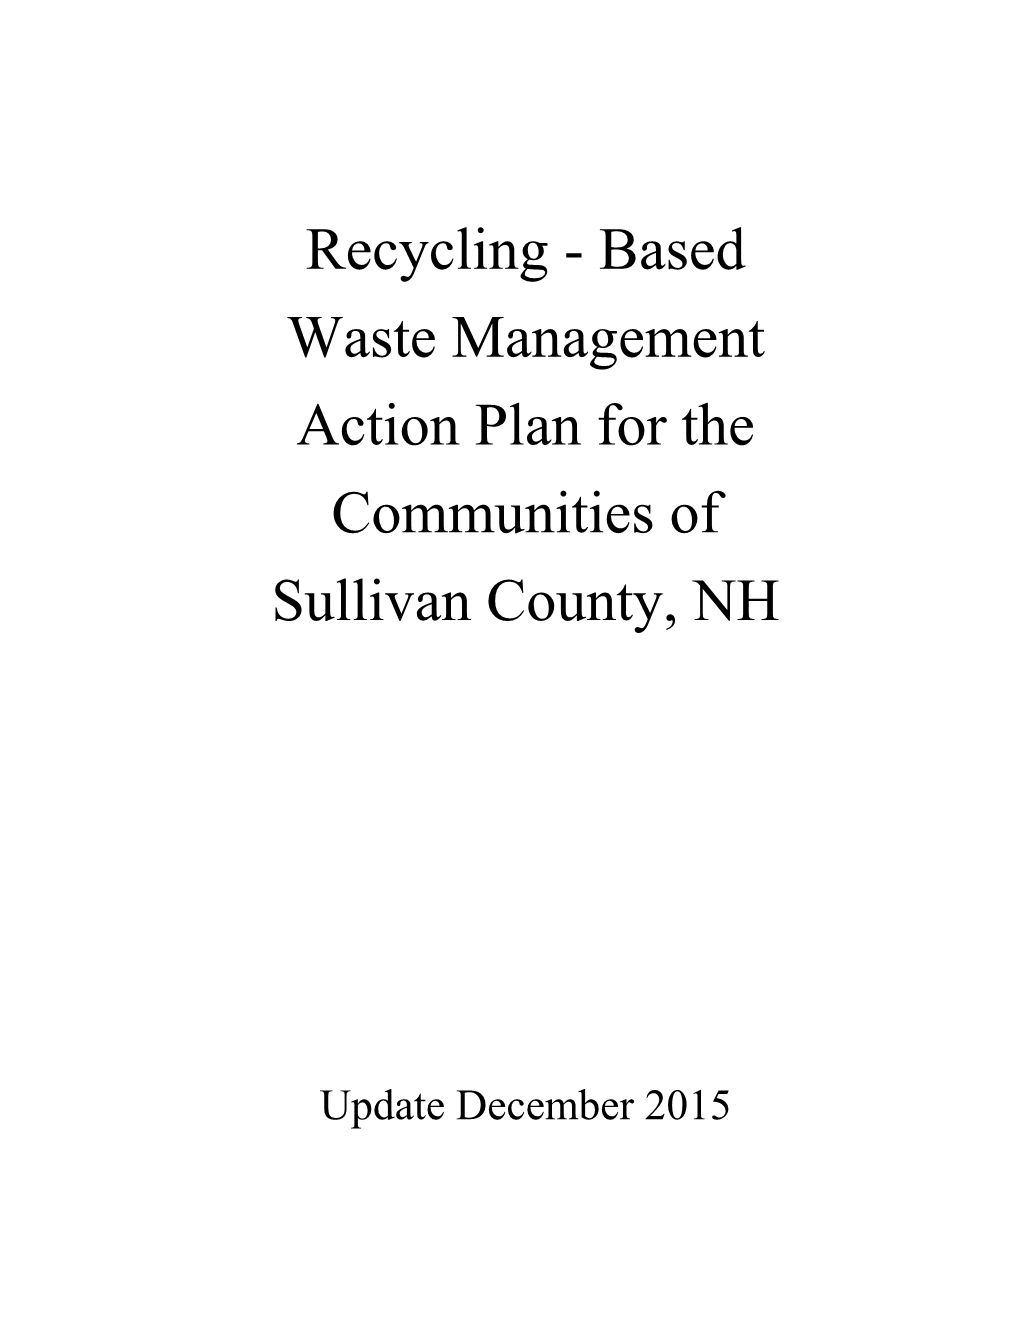 Waste Management Action Plan for the Communities of Sullivan County, NH